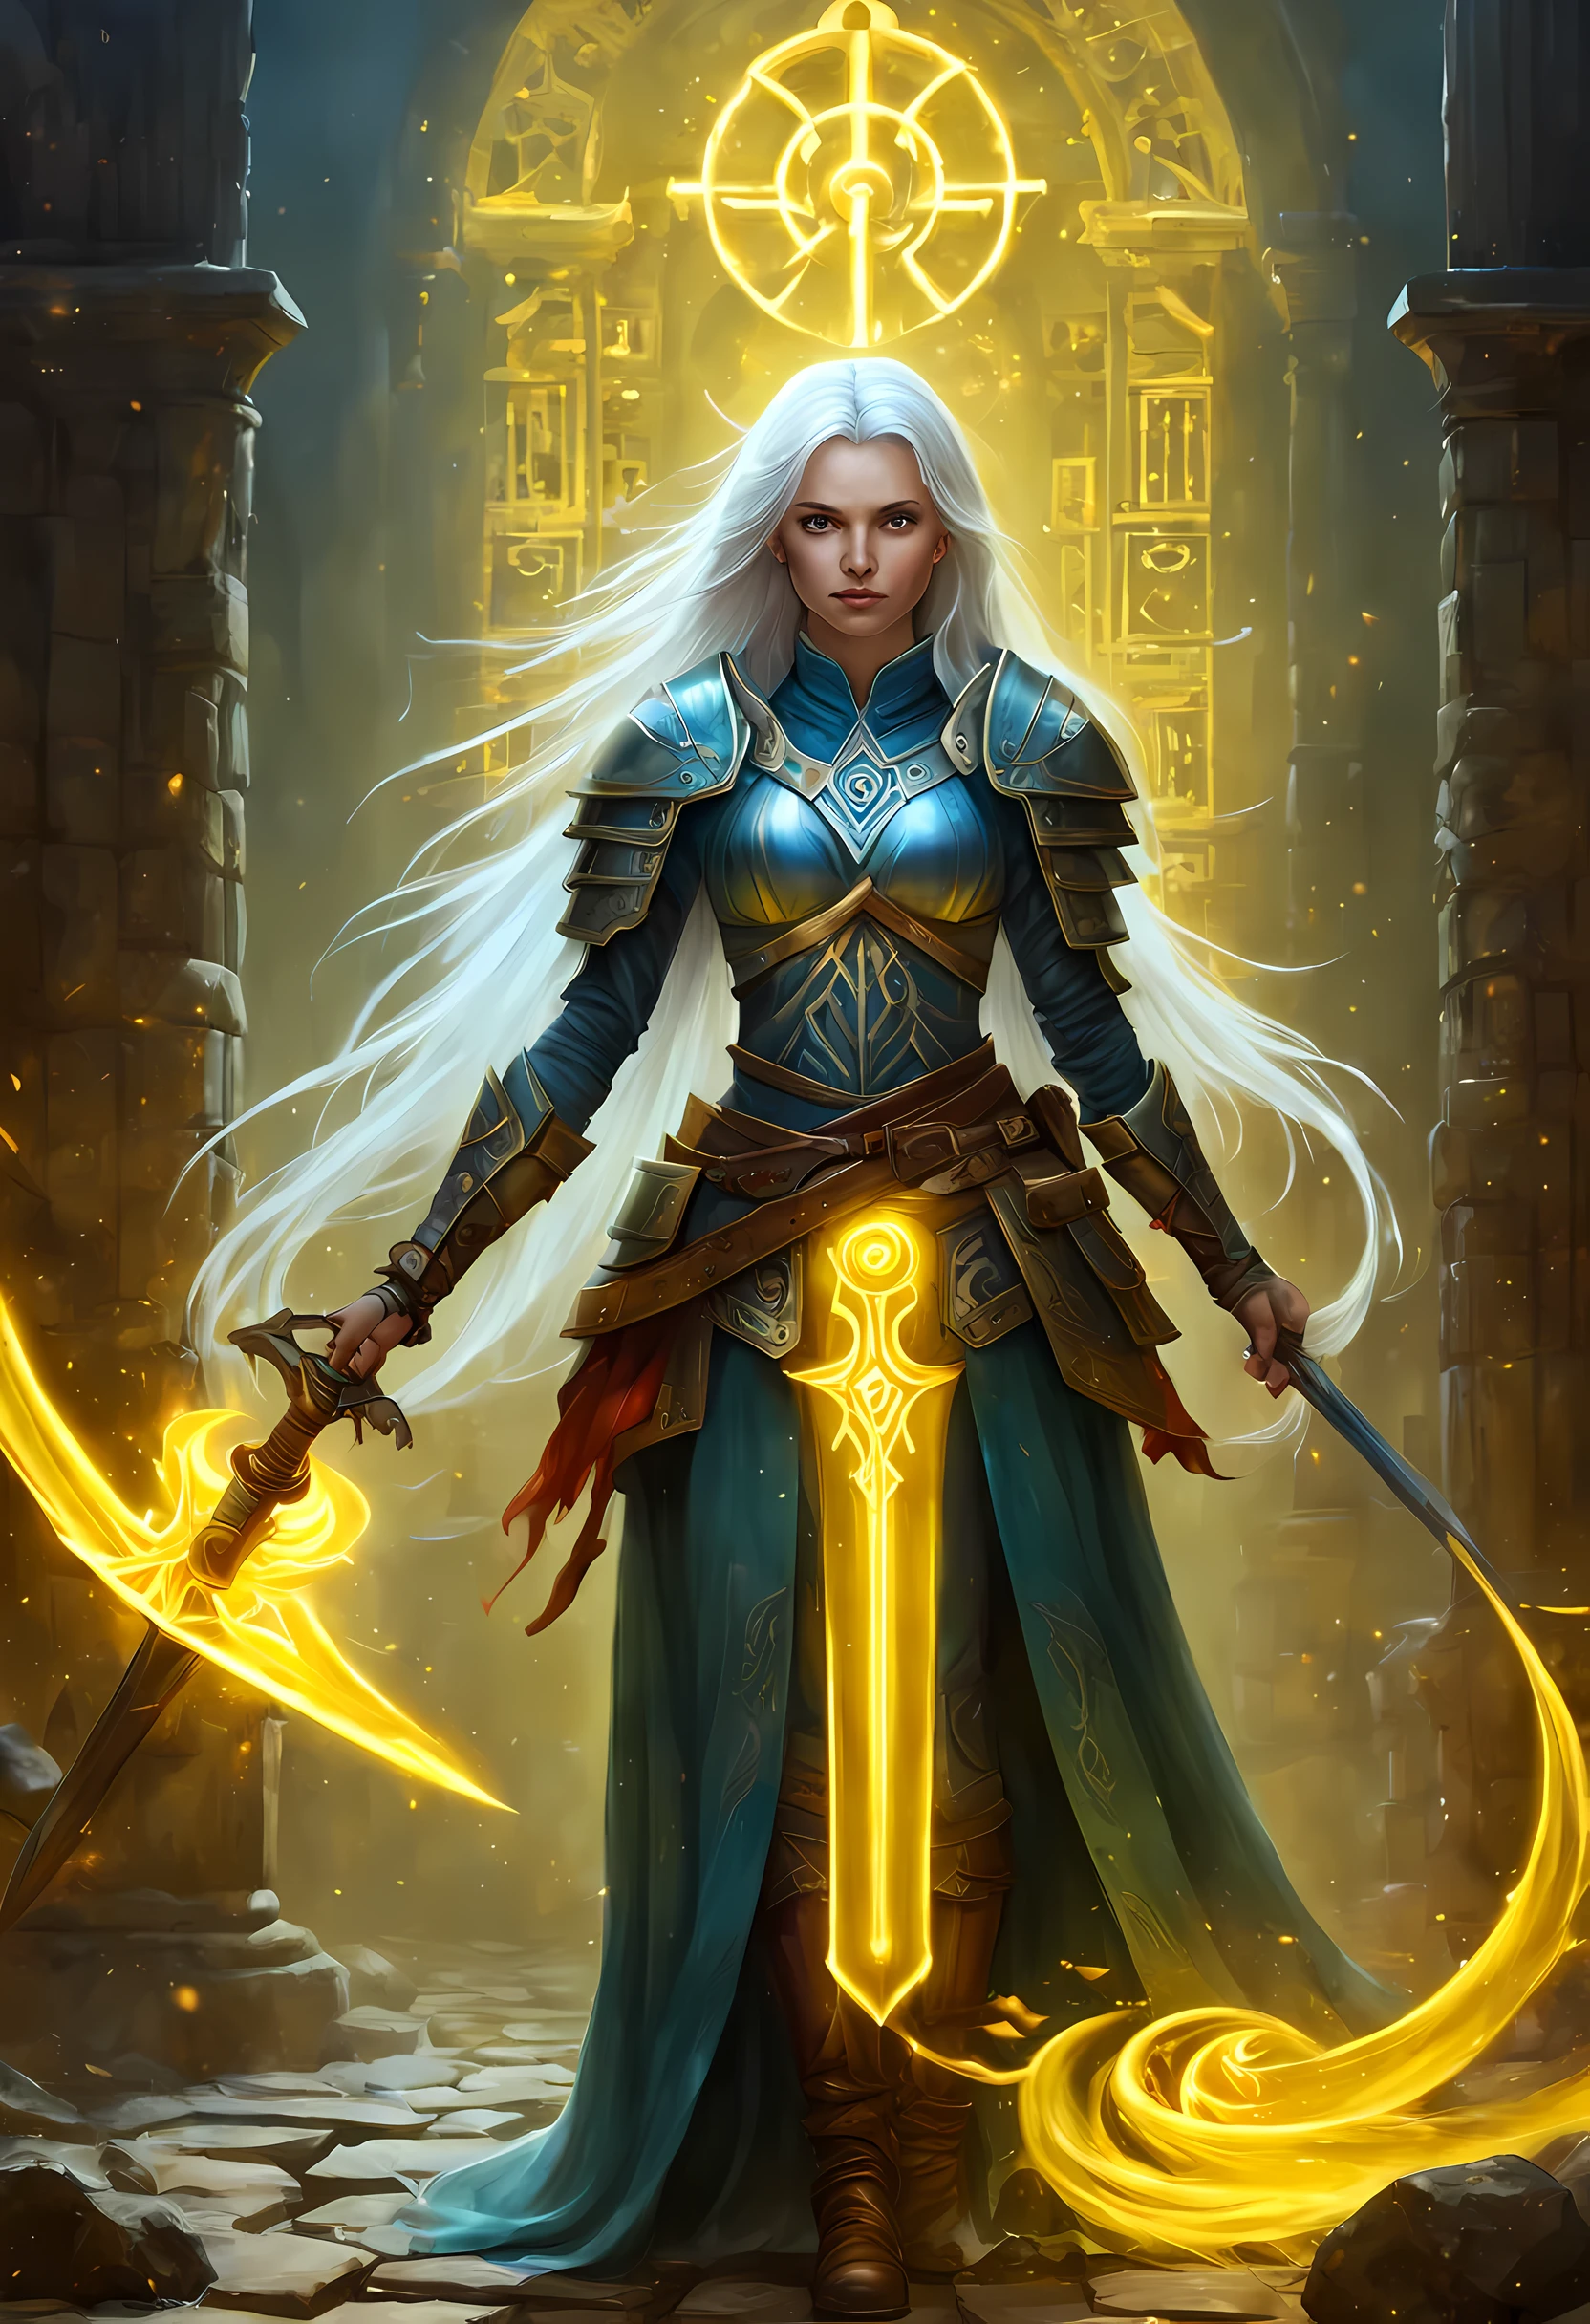 fantasy art, dnd art, RPG art, wide shot, (masterpiece: 1.4) a (portrait: 1.3) intense details, highly detailed, photorealistic, best quality, highres, GlowingRunesAI_yellow, portrait a female (fantasy art, Masterpiece, best quality: 1.3) , blue skasy art, Masterpiece, best quality: 1.3), intense details facial details, exquisite beauty, (fantasy art, Masterpiece, best quality) cleric, (blue: 1.3) skinned female, (white hair: 1.3), long hair, intense (green: 1.3) eye, fantasy art, Masterpiece, best quality) armed a fiery sword red fire, wearing heavy (white: 1.3) half plate mail armor, wearing high heeled laced boots, wearing an(orange :1.3) cloak, wearing glowing holy symbol GlowingRunes_yellow, within fantasy temple background, reflection light, high details, best quality, 16k, [ultra detailed], masterpiece, best quality, (extremely detailed), close up, ultra wide shot, photorealistic, RAW, fantasy art, dnd art, fantasy art, realistic art,((best quality)), ((masterpiece)), (detailed), perfect face, ((no ears: 1.6))